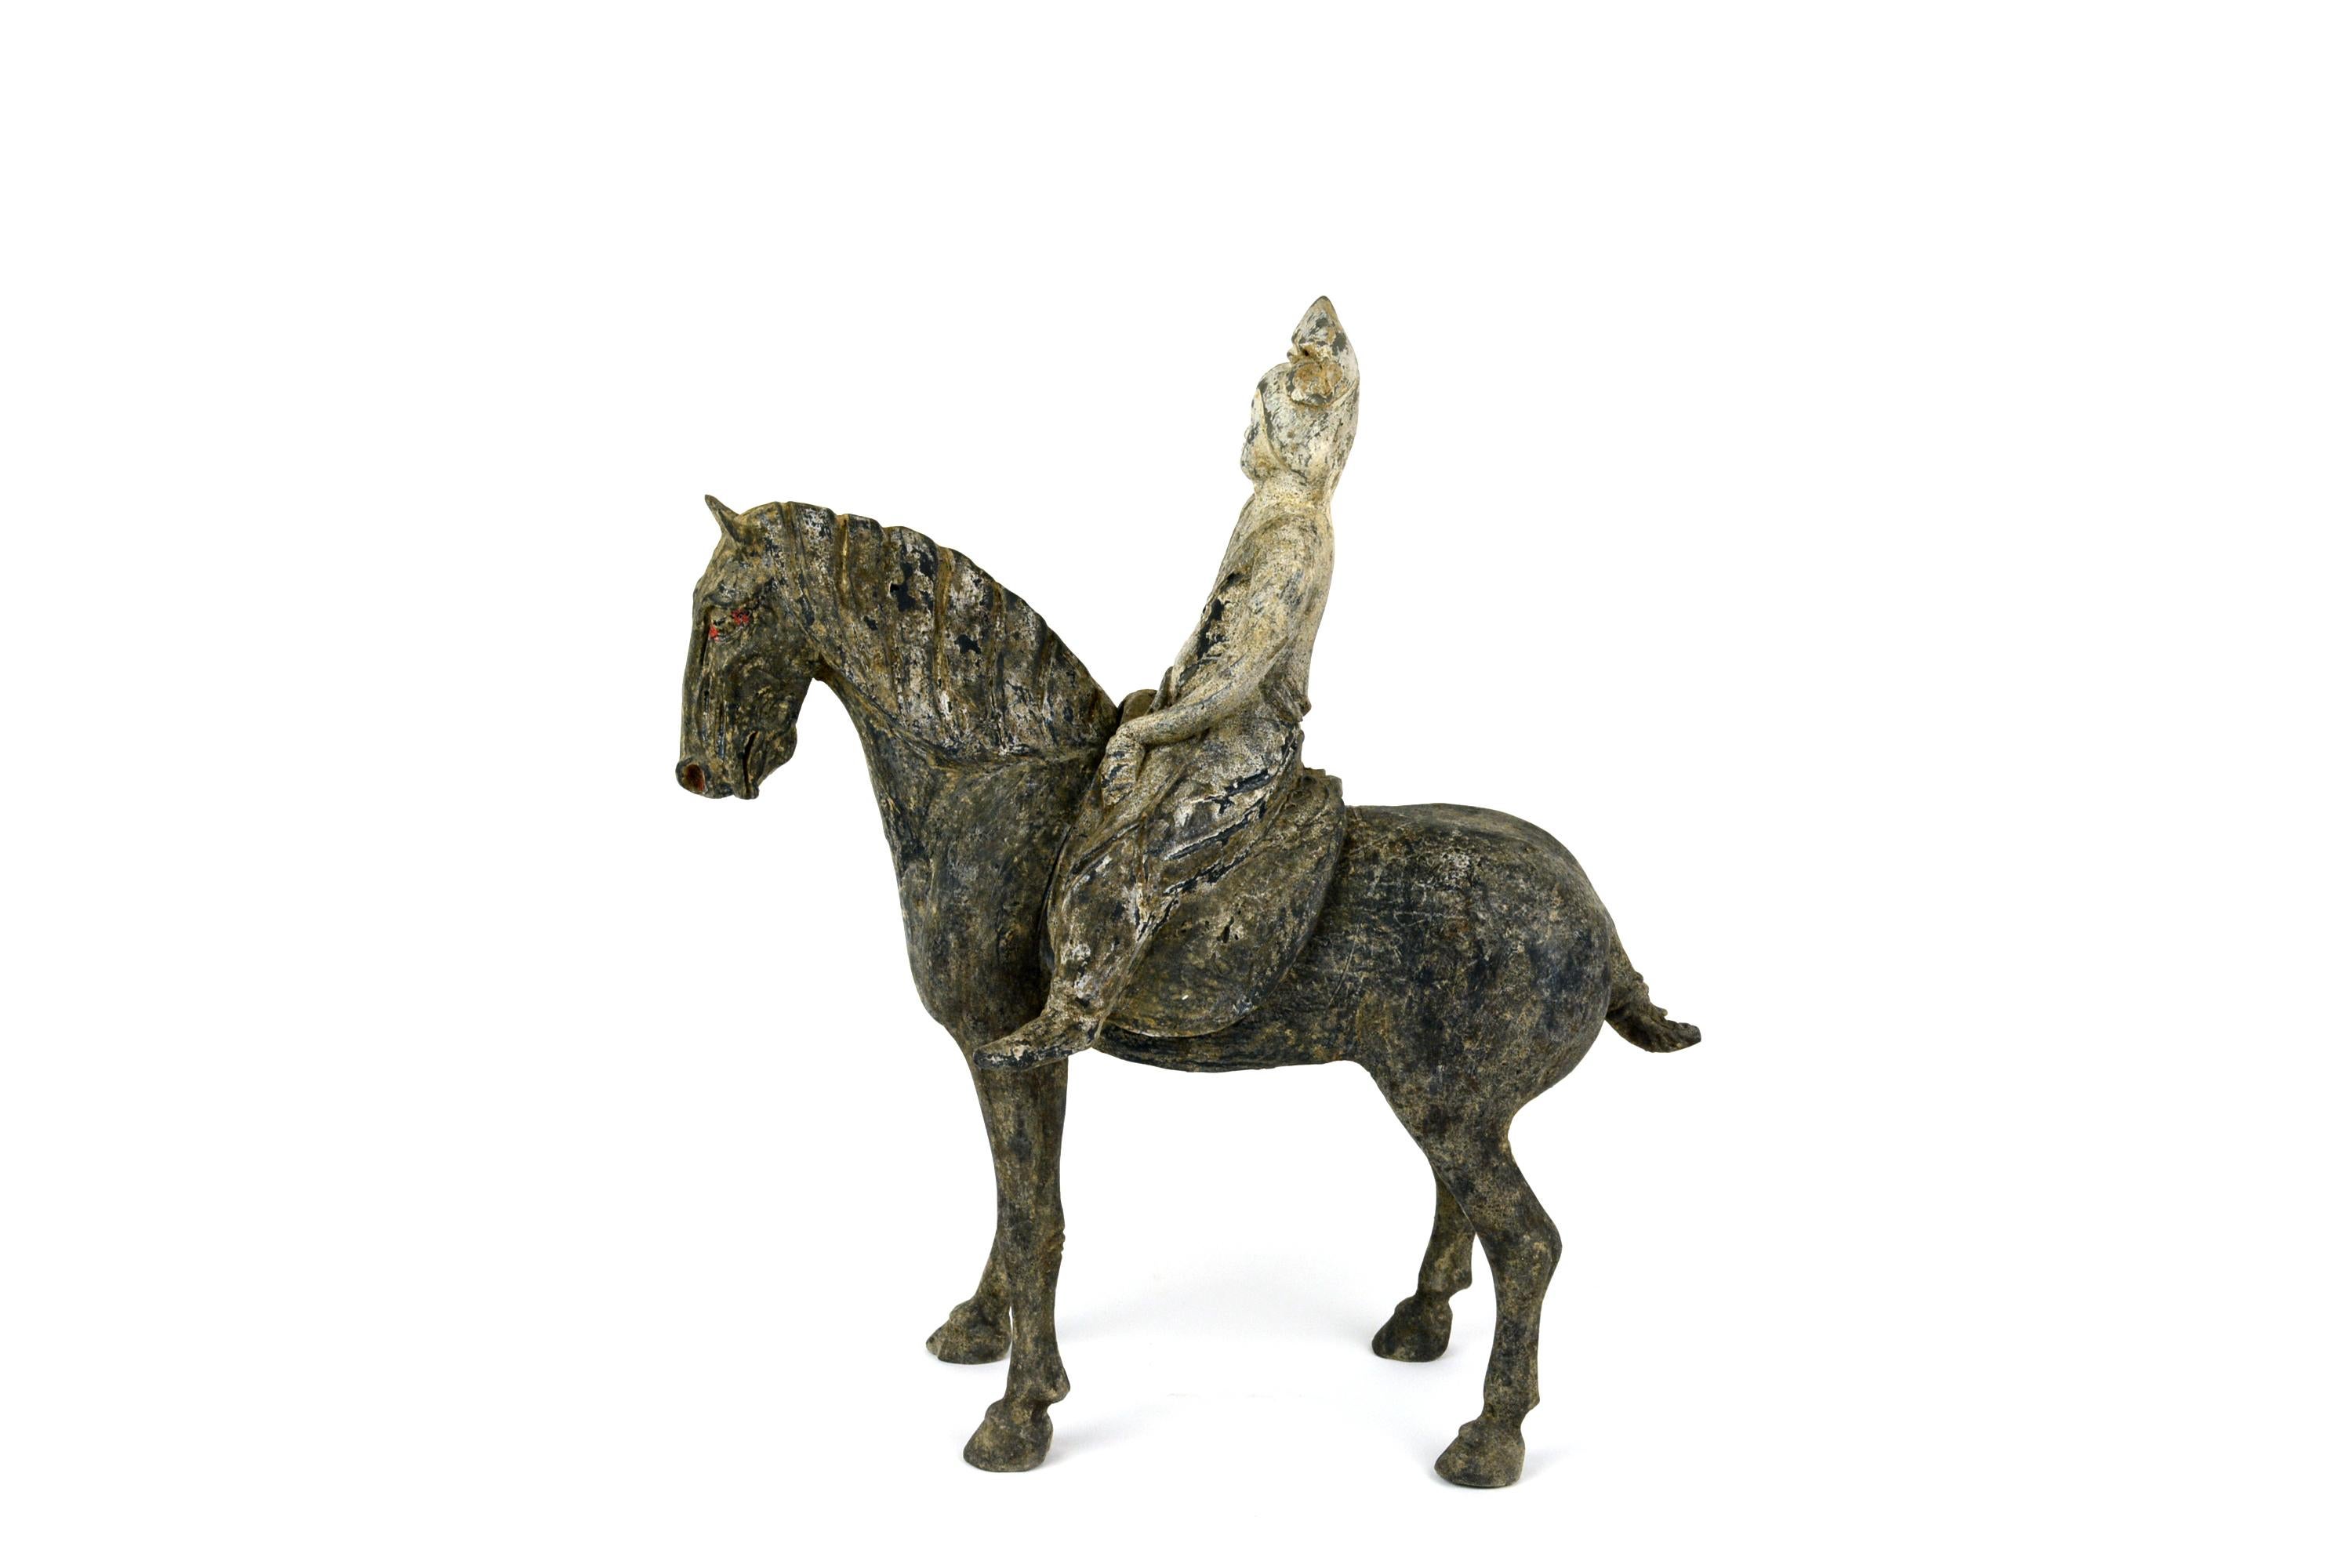 Tang Equestrian with detachable rider 12h
Early Tang unglazed pottery is characterized by its realism and elegant shape of the horse. This equestrian has a detachable female rider. The rider depicted is a noble lady in outing clothing. The pottery